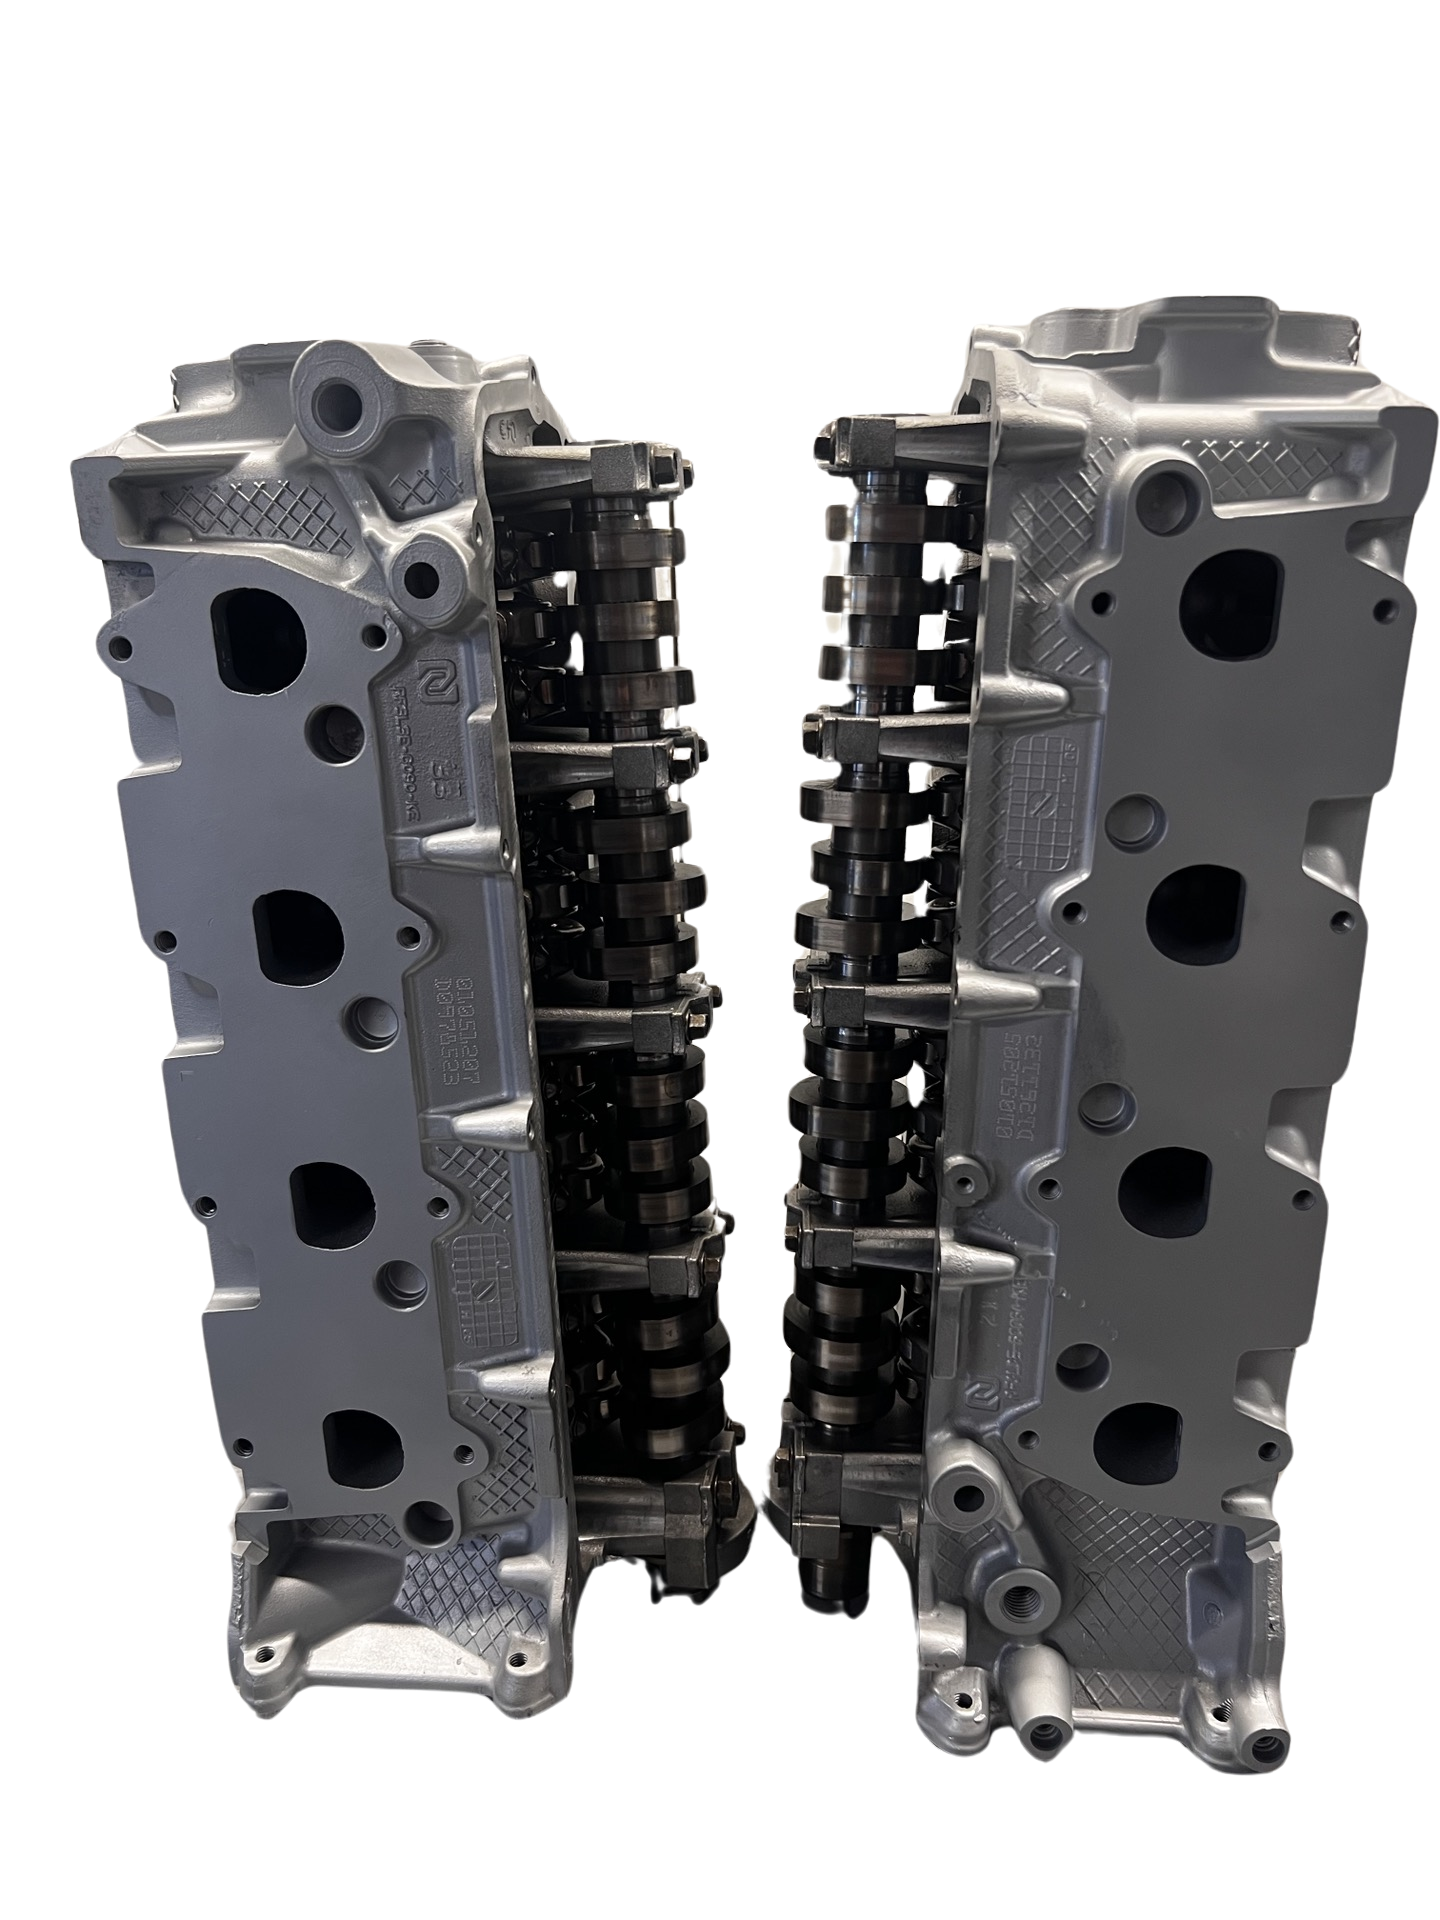 Intake side of cylinder heads Ford 2004-2007 Casting #RF-3L3E 4.6L or 5.4L (SOLD IN PAIR)